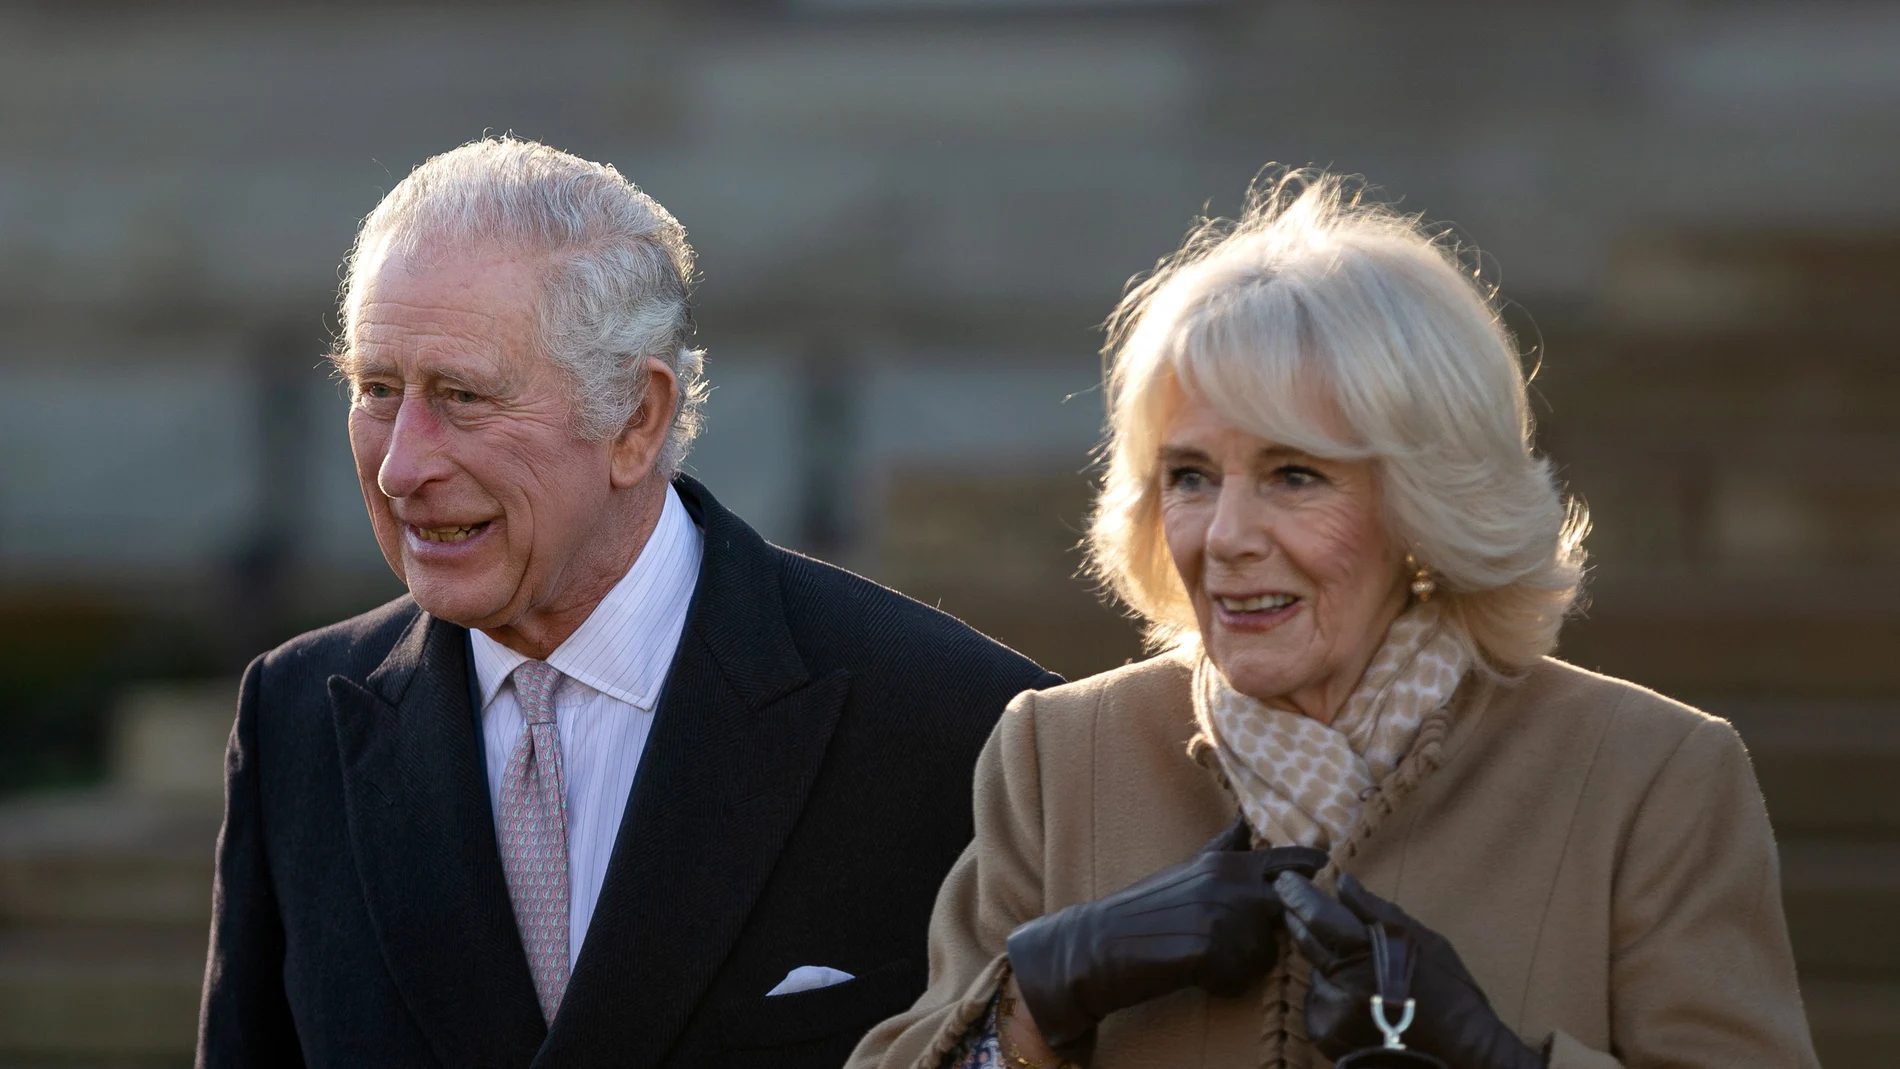 Britain's King Charles III (L) and Camilla, The Queen Consort (R) leave Bolton Town Hall in Bolton, Britain, 20 January 2023